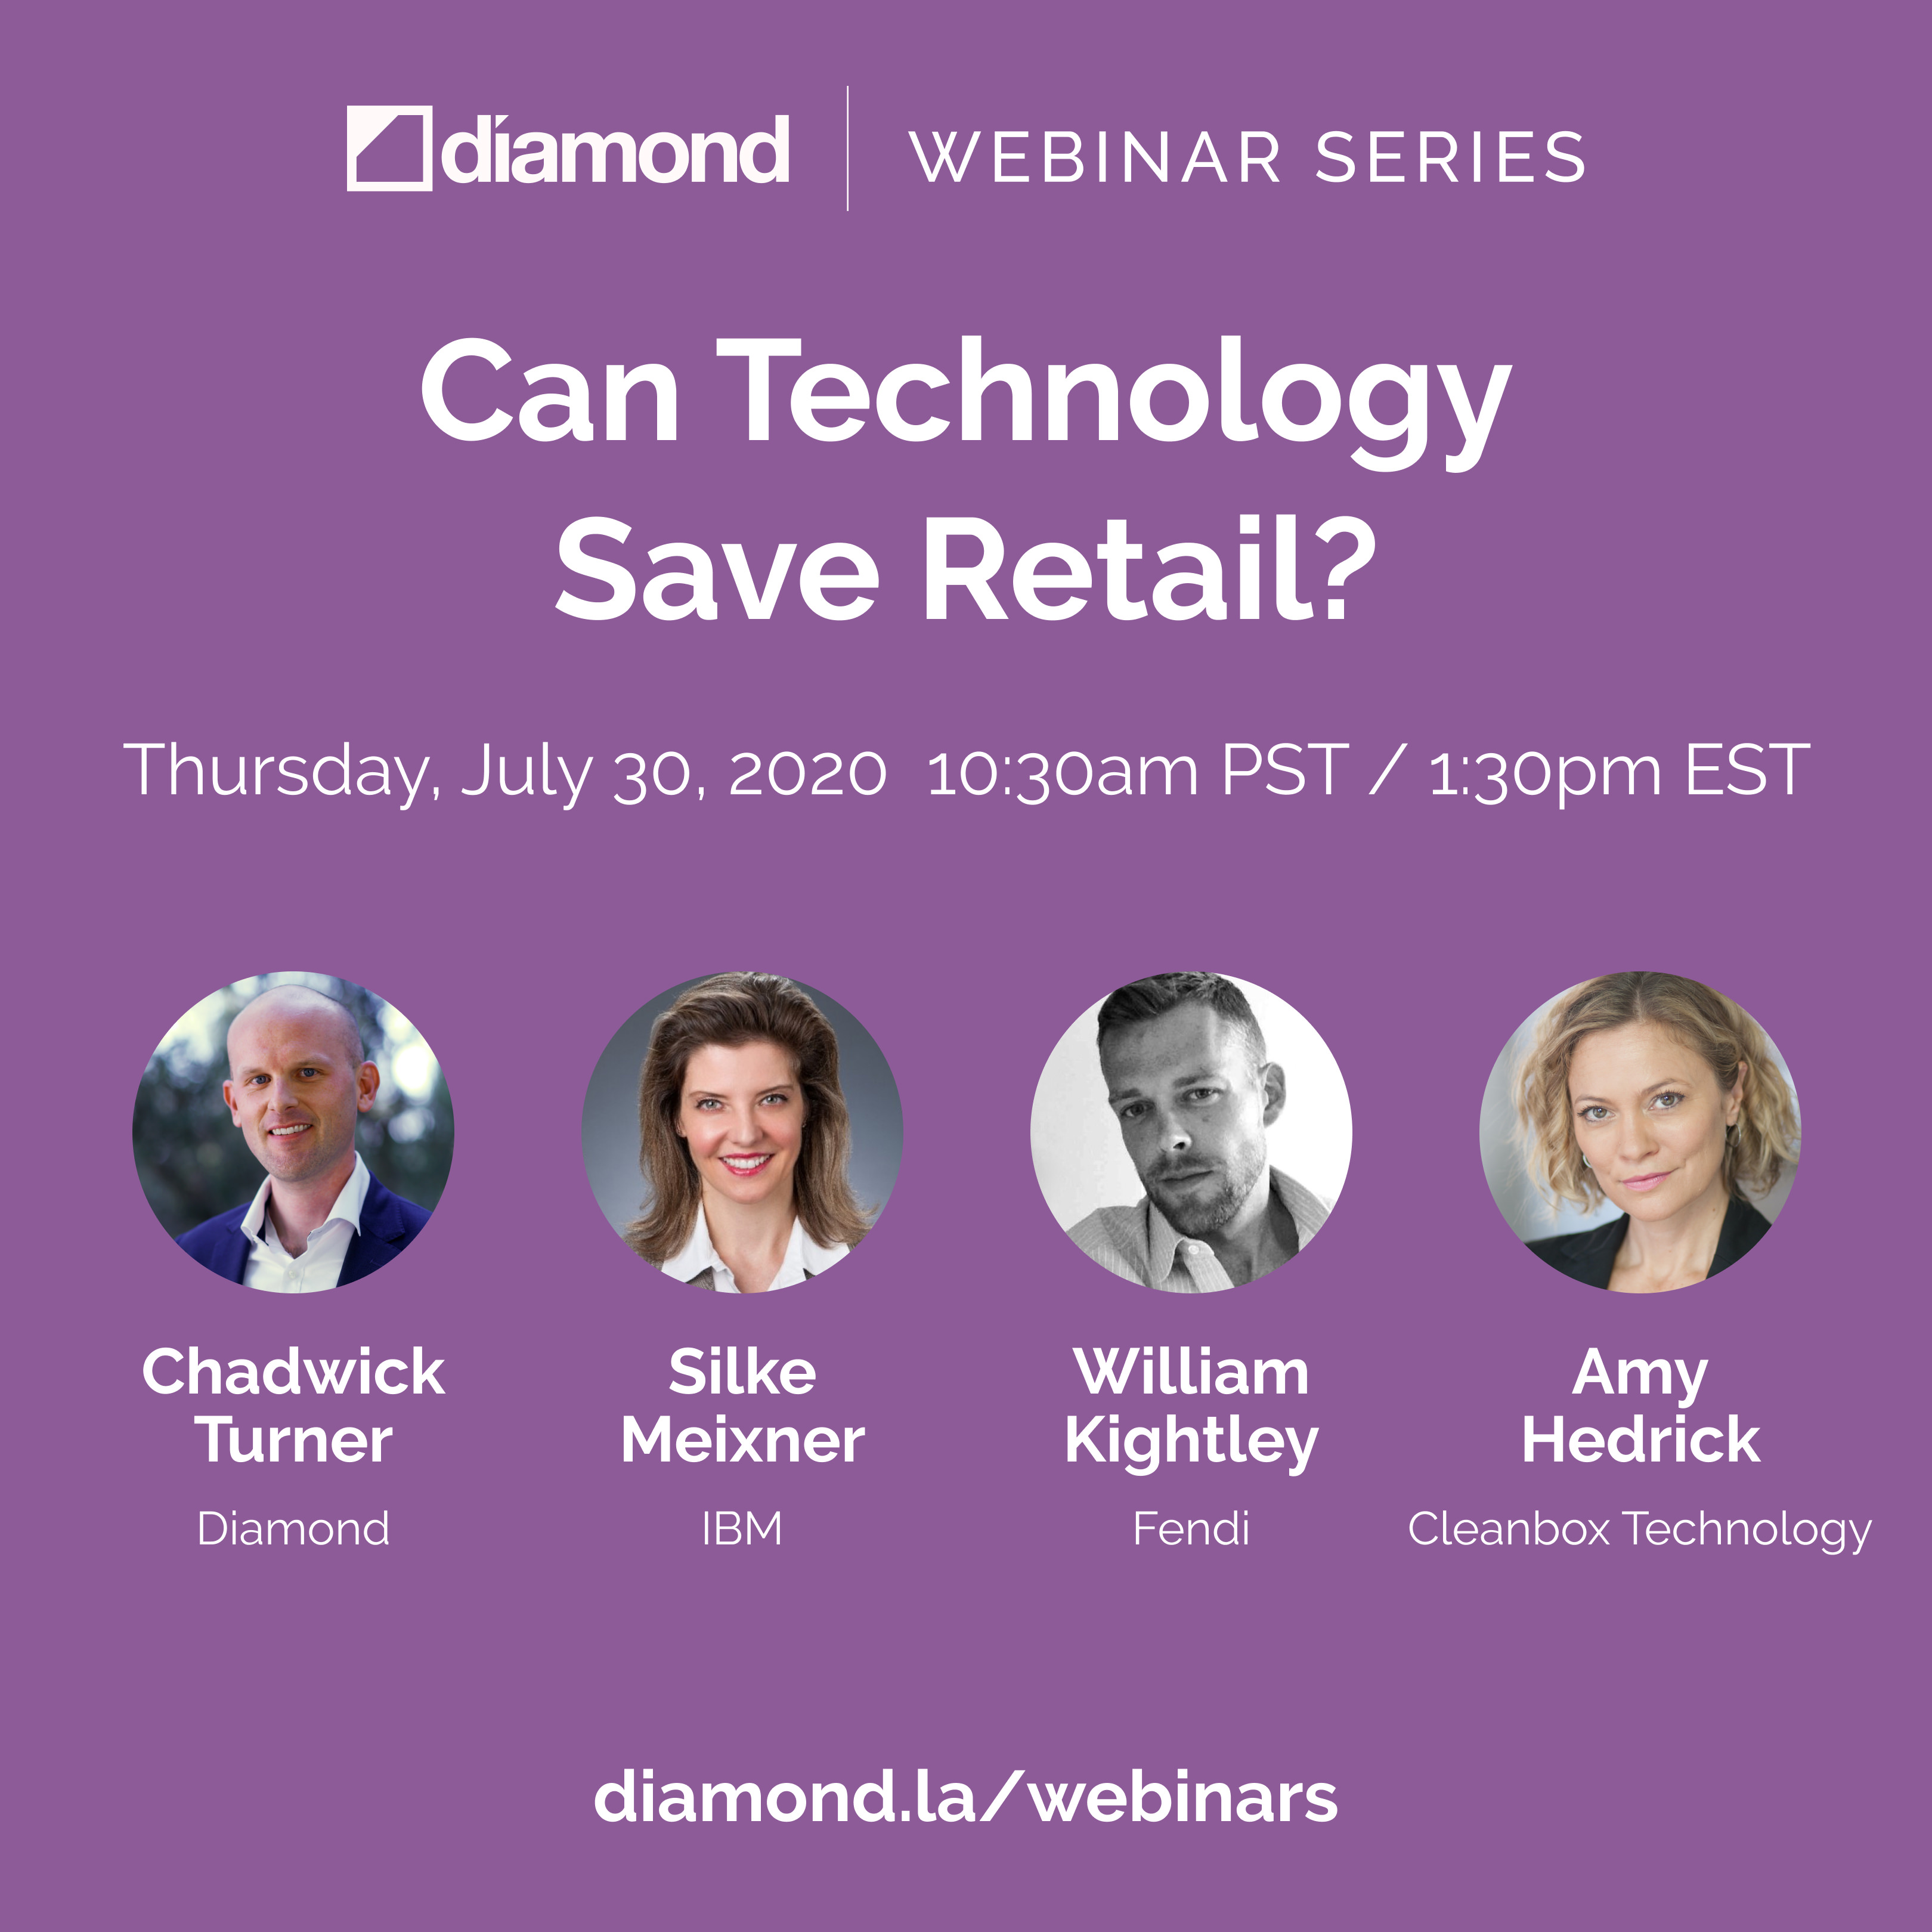 Image of Diamond Panelists for July 30th webinar at 1030am pst/130pm est, Chadwick Turner of Diamond, Silke Meixner of IBM, William Kightley of Fendi and Amy Hedrick with Cleanbox Technology